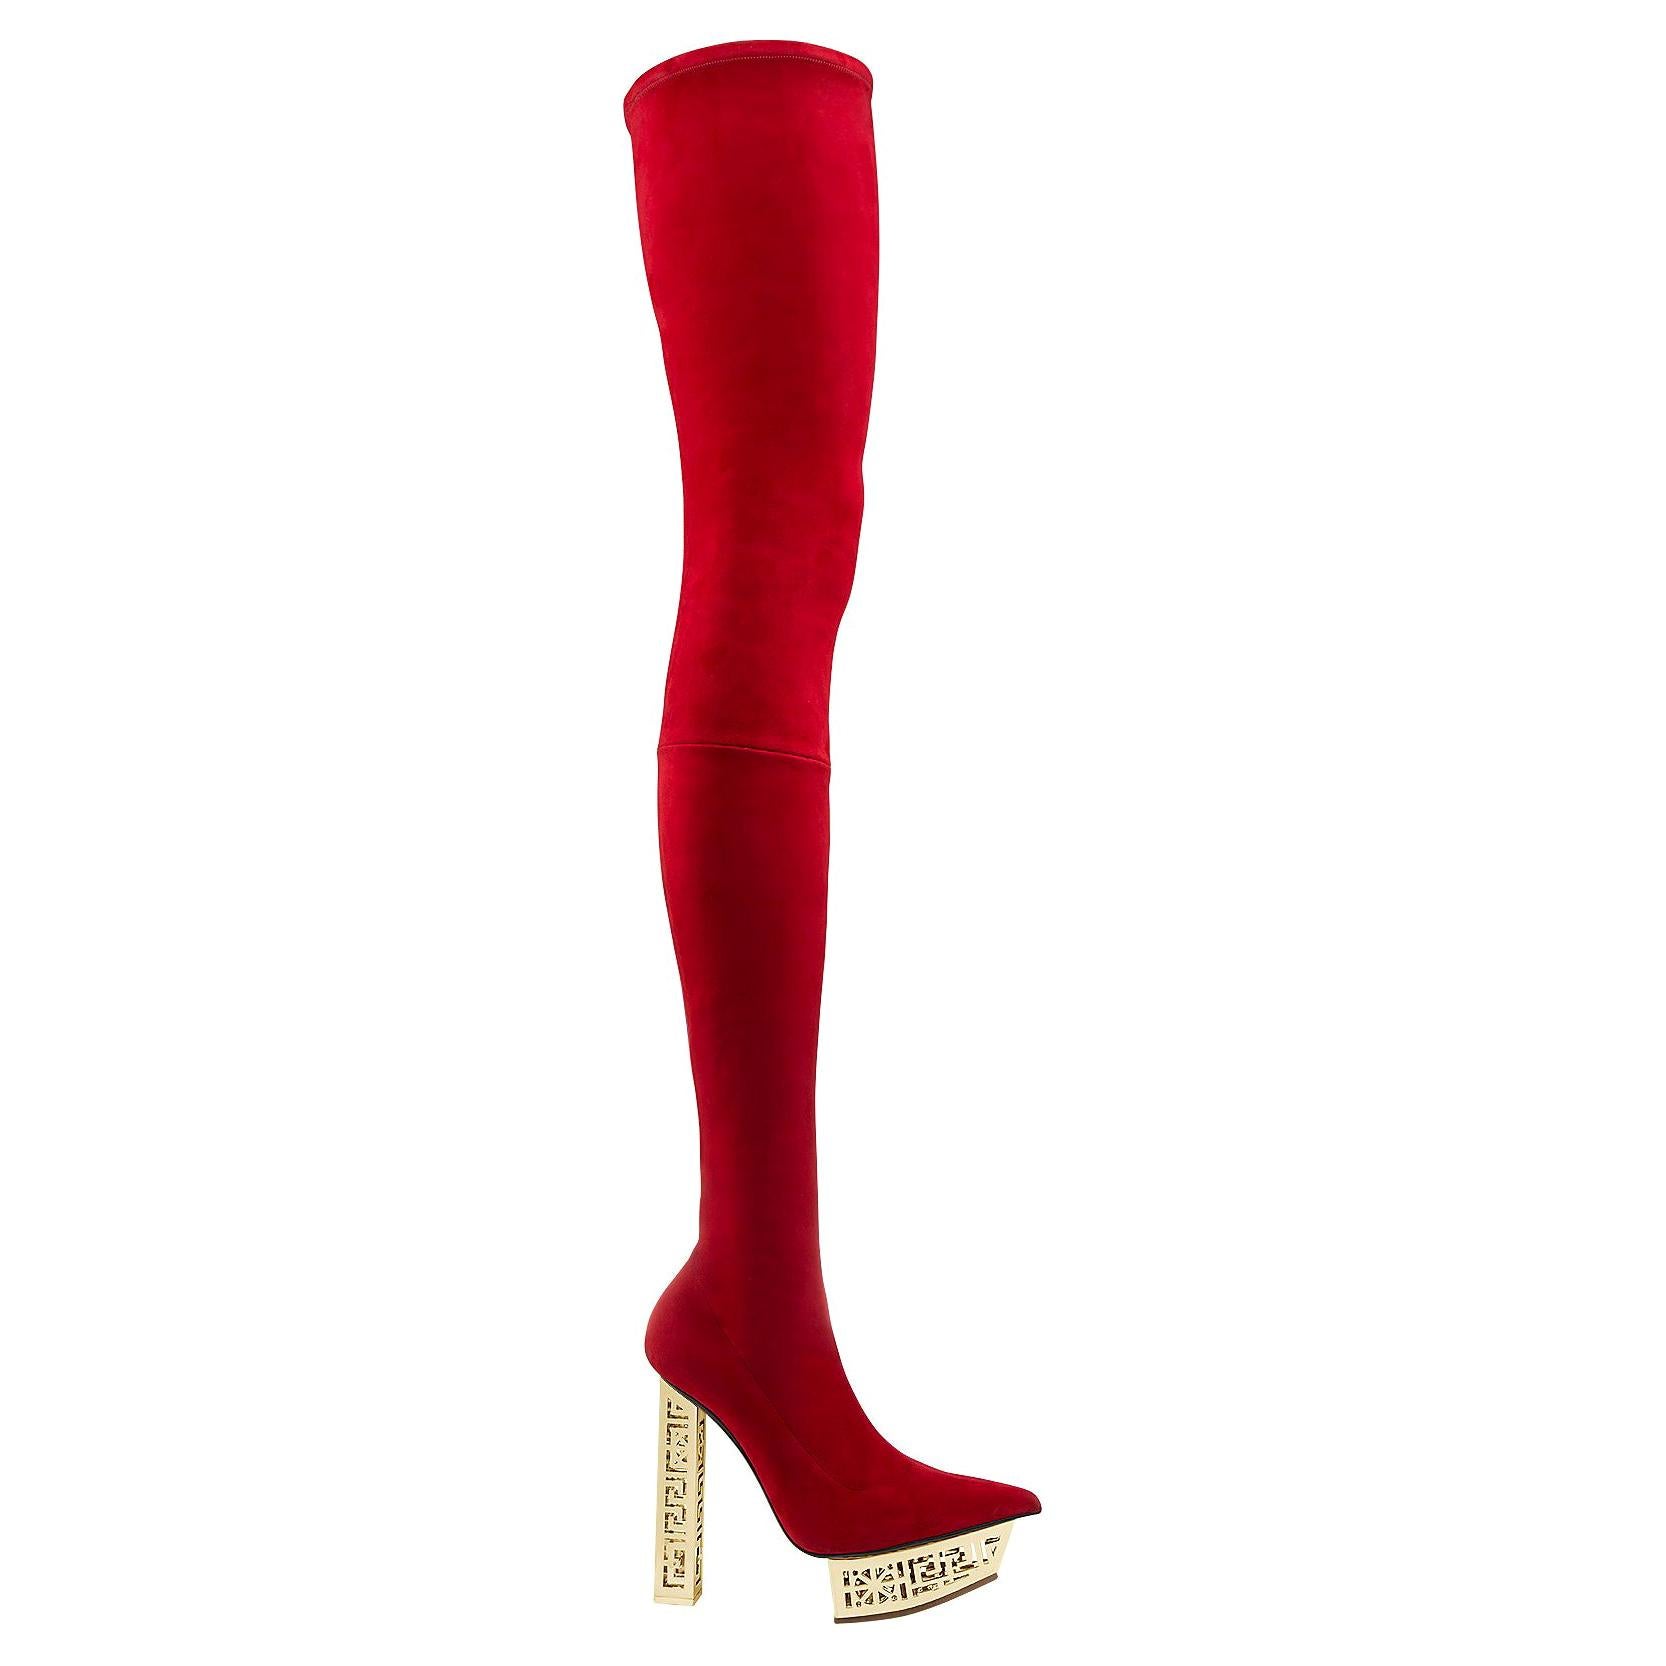 New VERSACE #GREEK RED SUEDE OVER The KNEE BOOTS Sz 38 - 8